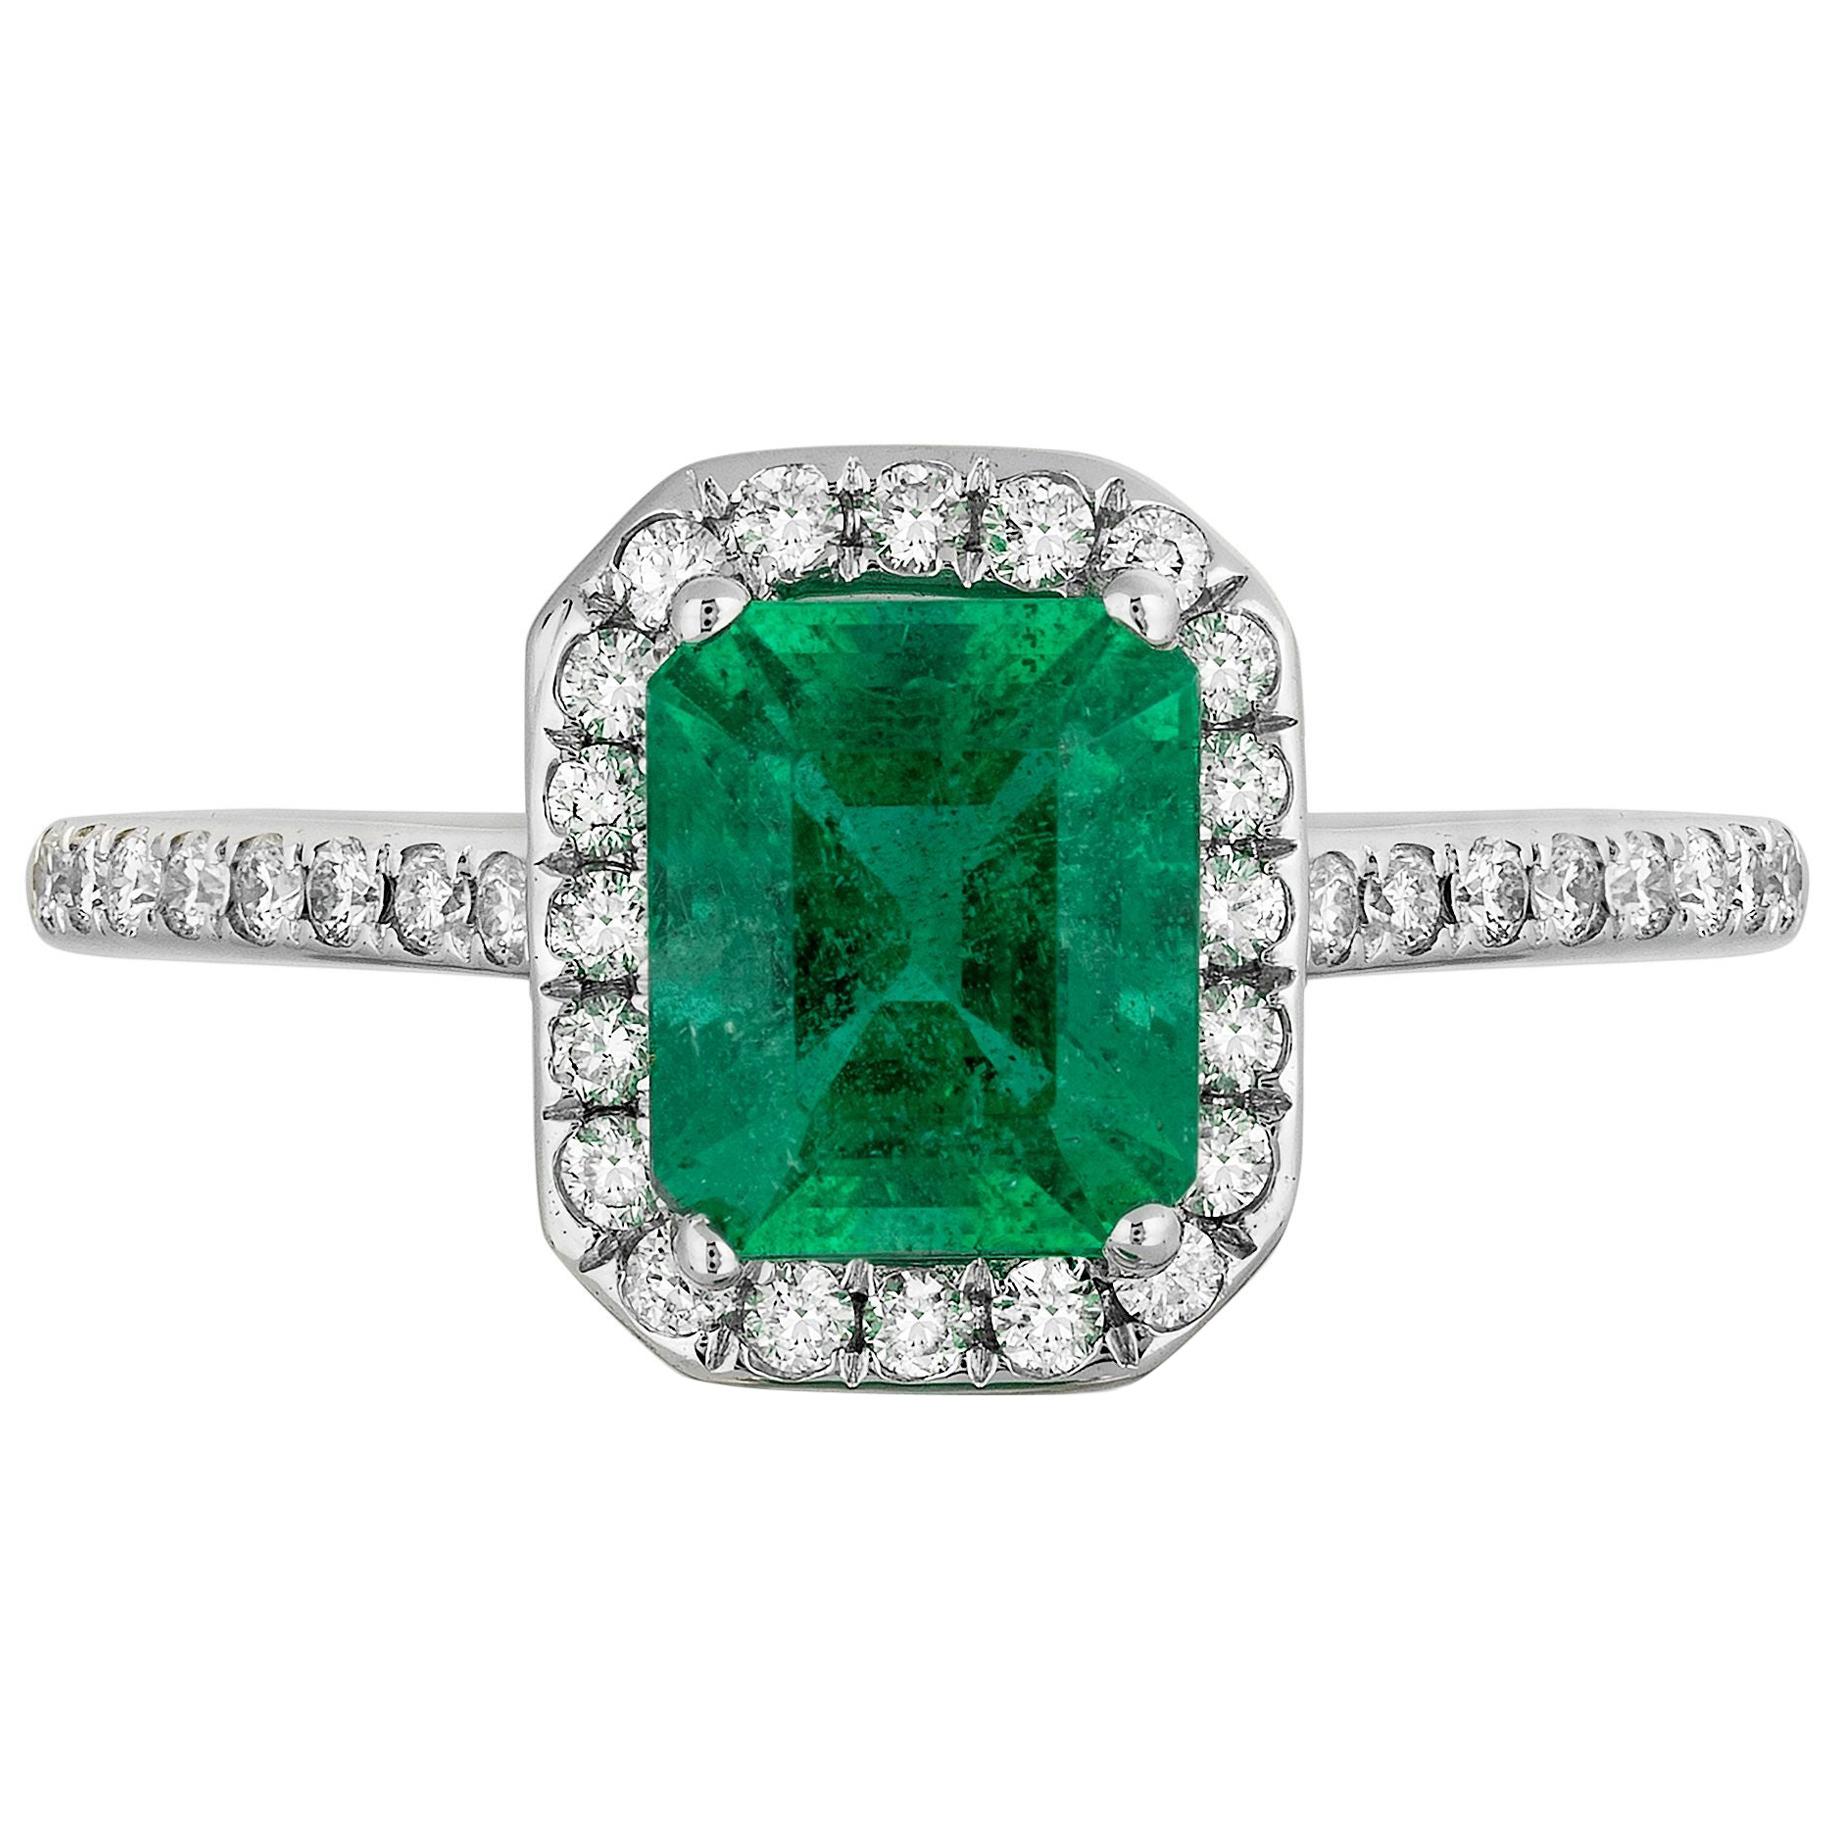 1.16 Carat Emerald Diamond Cocktail Ring For Sale